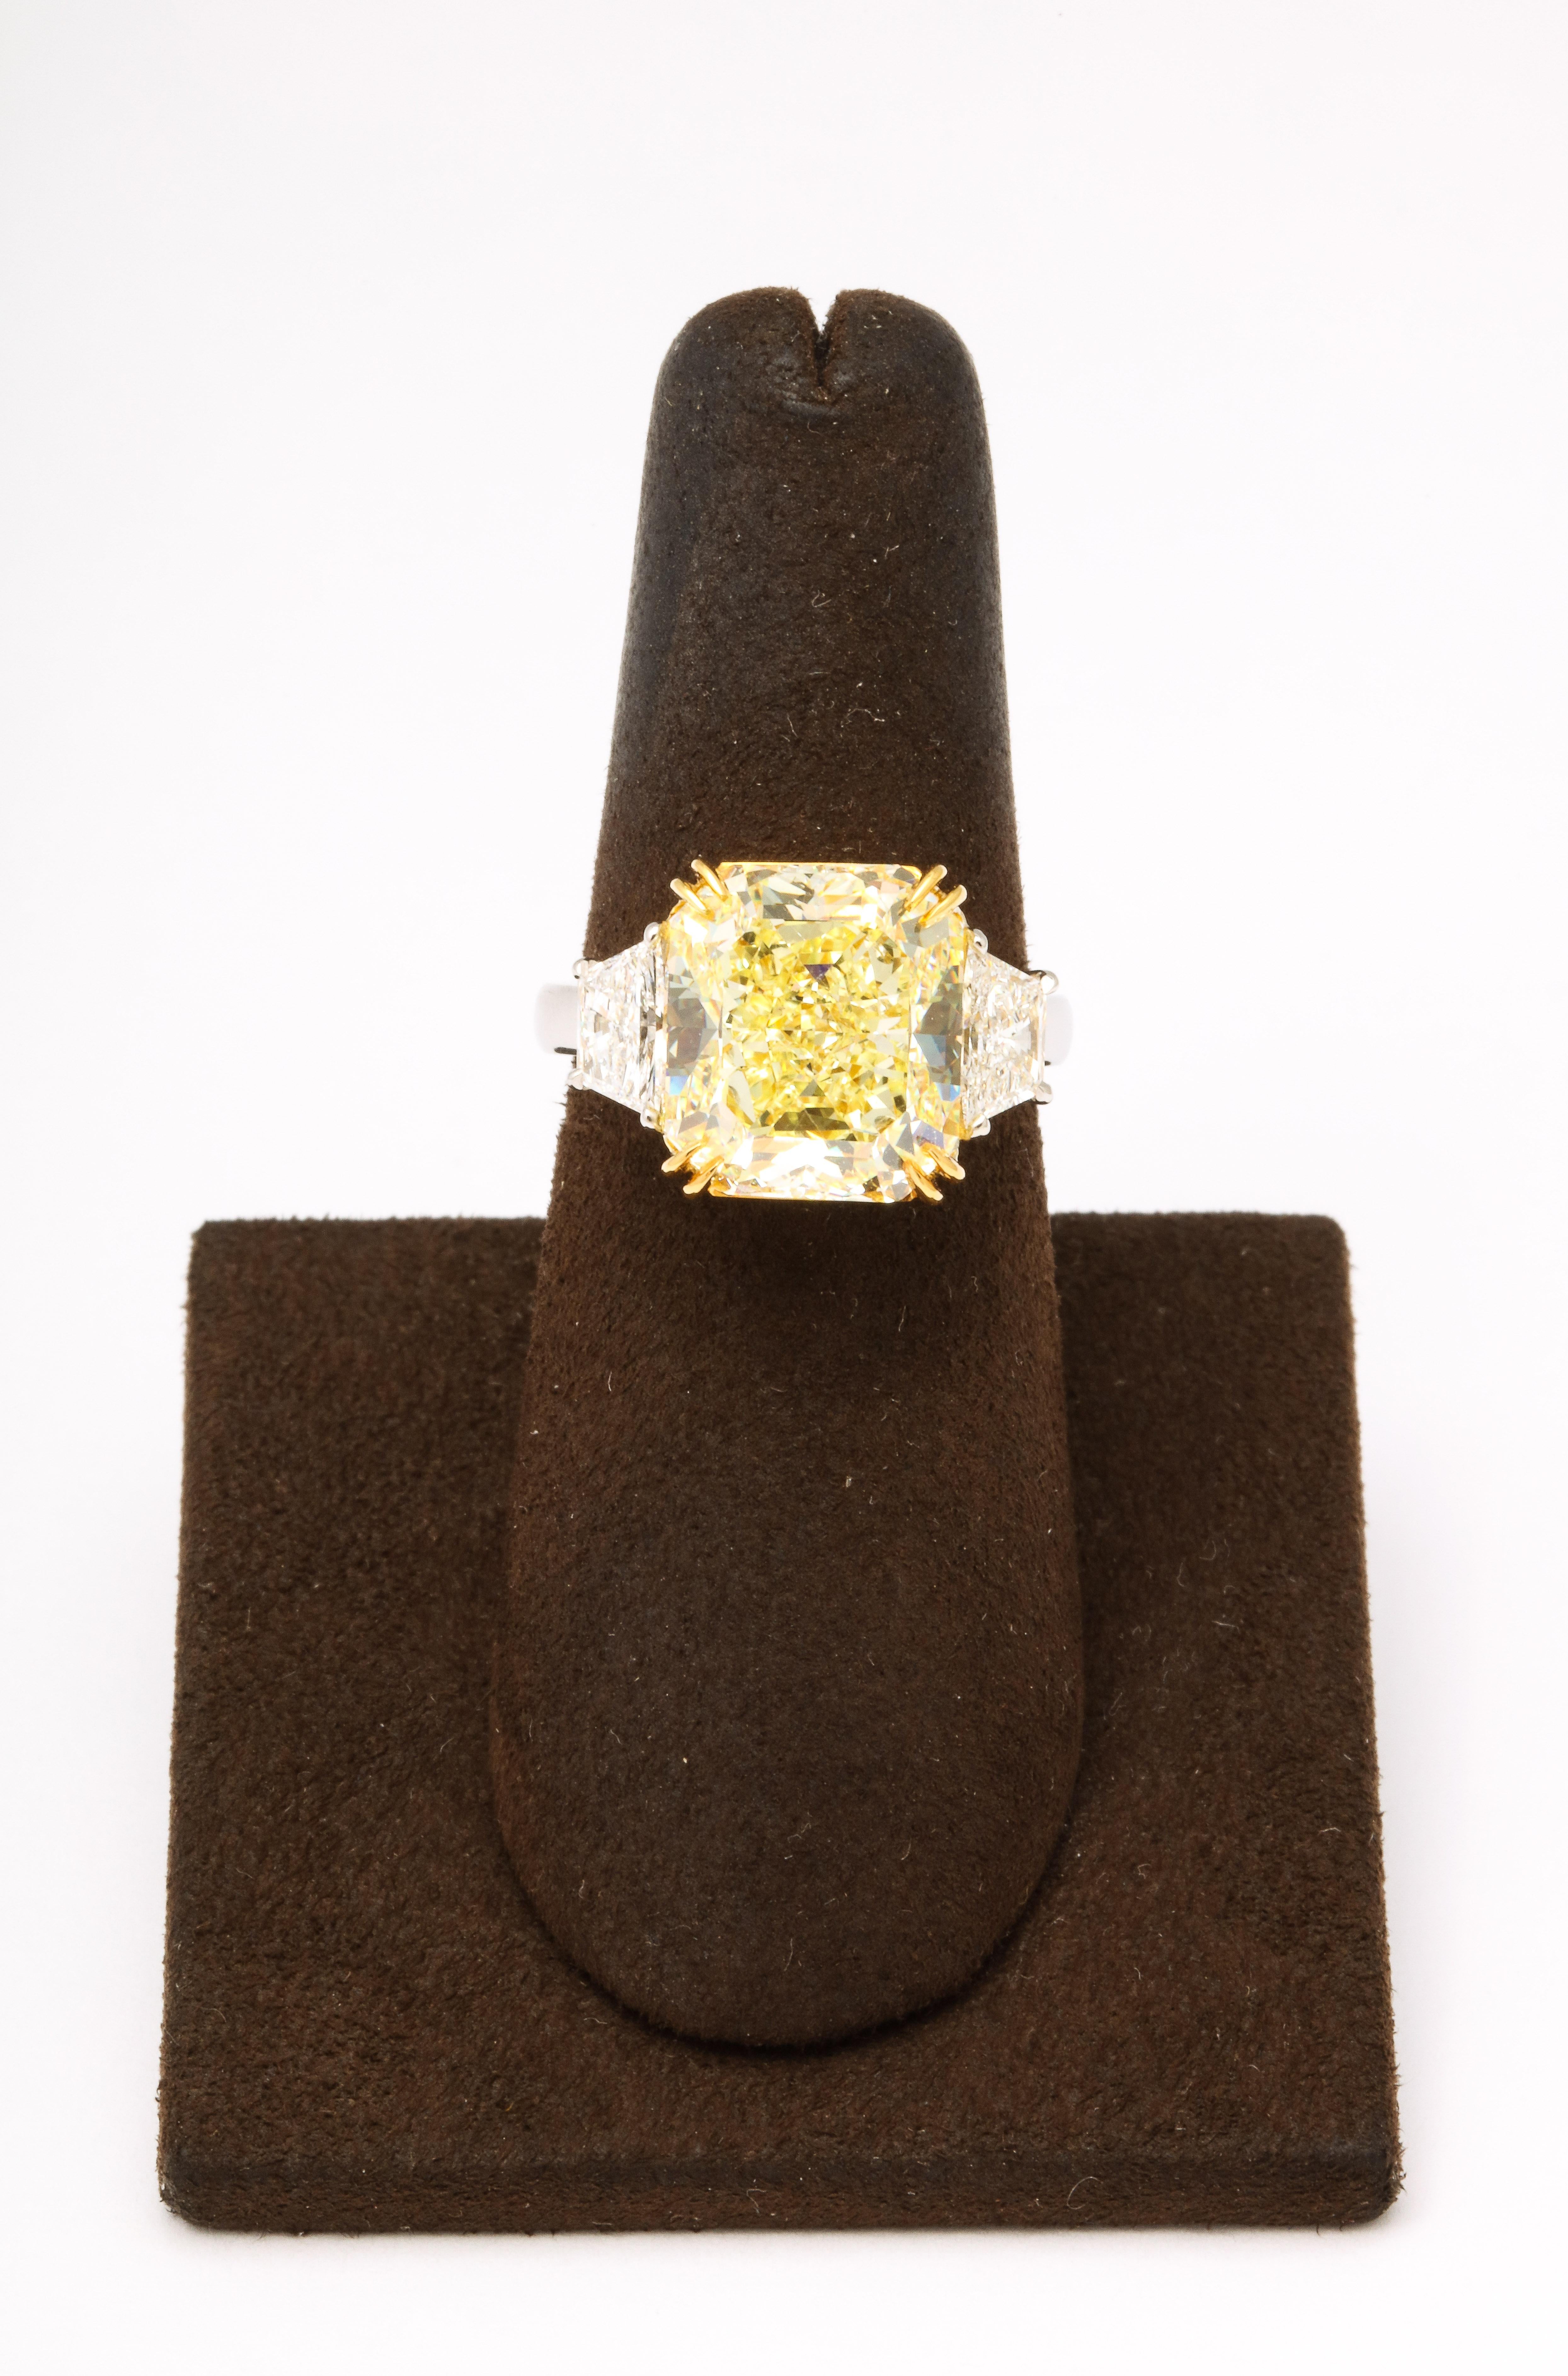 
A STUNNING yellow diamond ring!

GIA certified 8.22 carat Radiant cut Fancy Yellow, SI2 center diamond. 

.85 carats of white side diamonds. 

Custom platinum and 18k yellow gold mounting. 

Size 6.25, this ring can easily be resized. 